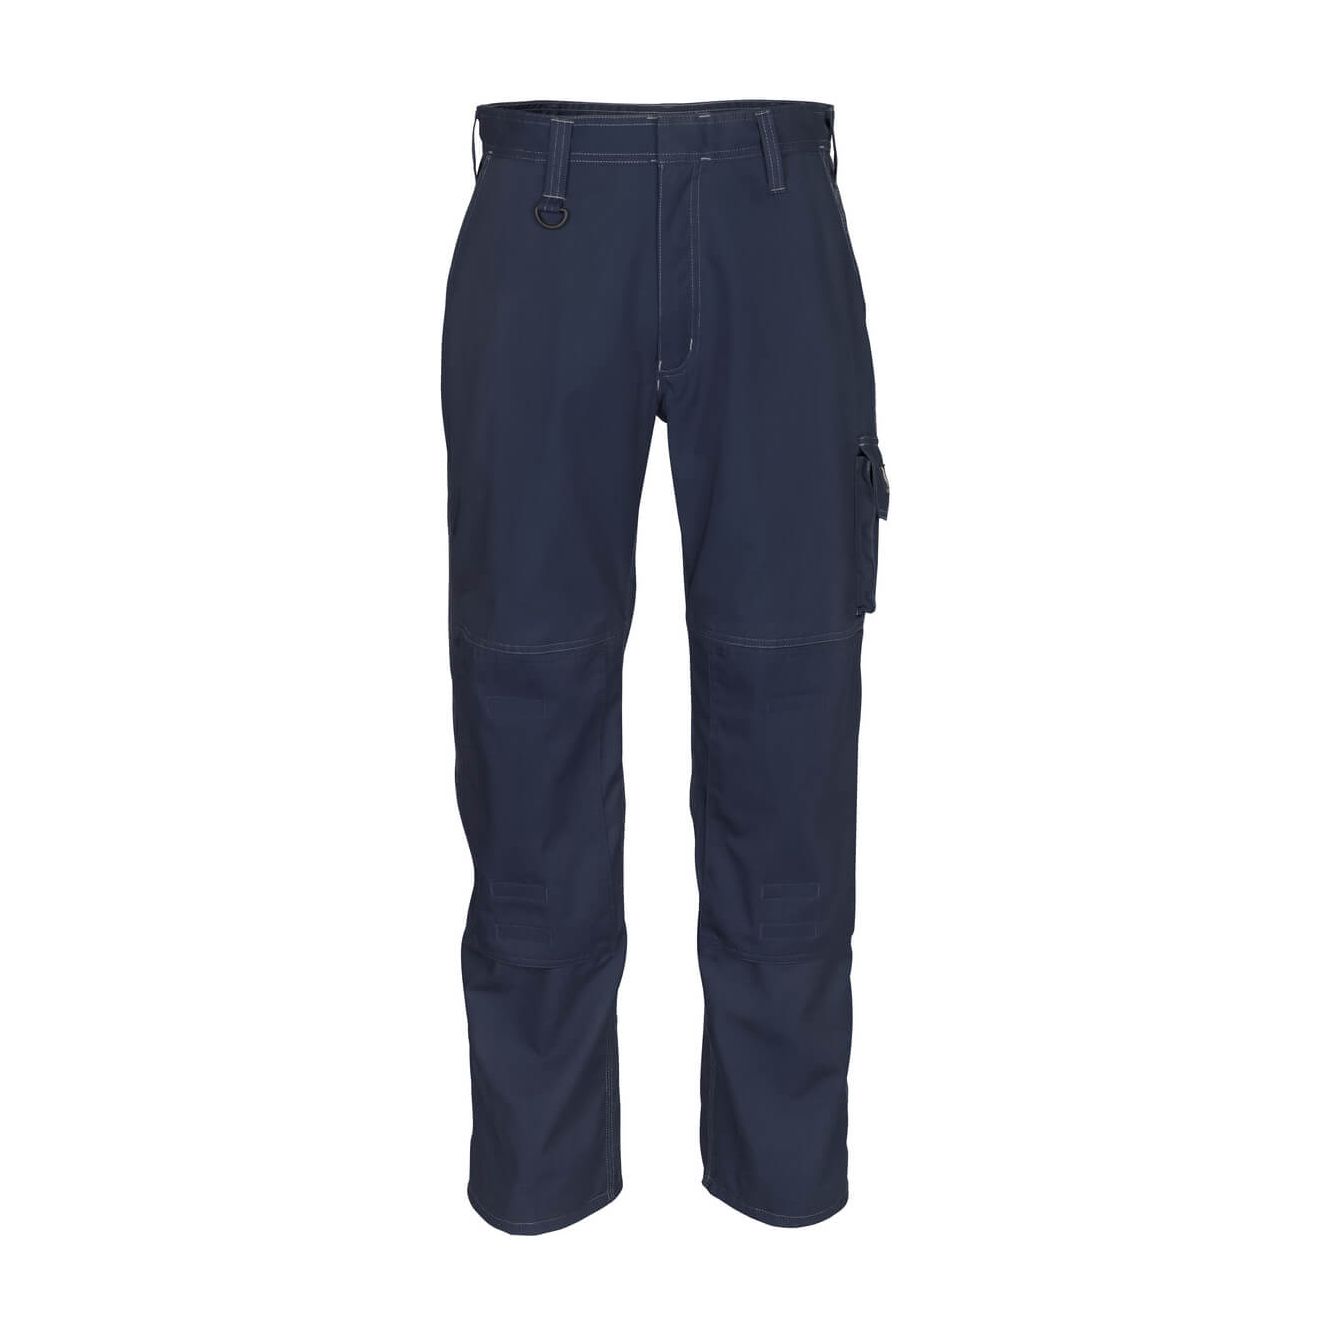 MASCOT® Pittsburgh INDUSTRY Trousers with kneepad pockets 10579